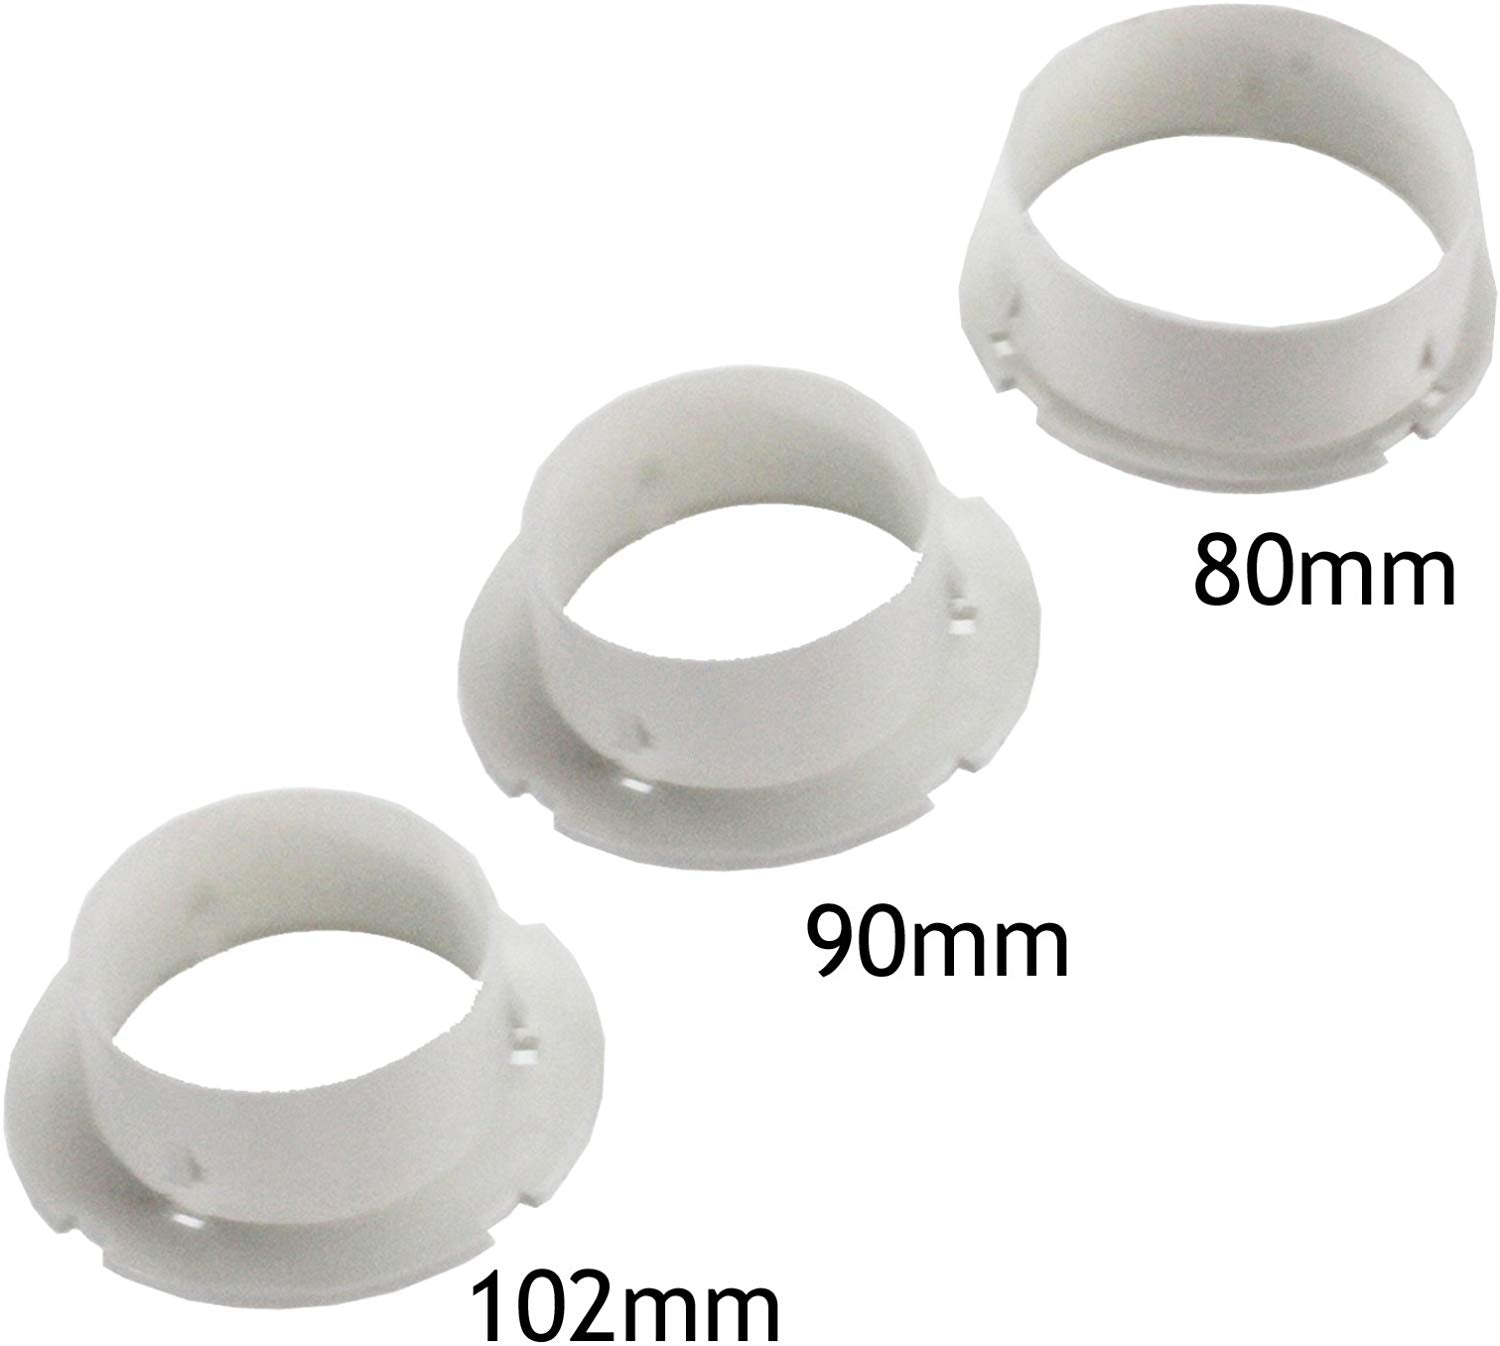 Vent Hose Condenser Kit with 3 x Adapters for Creda Tumble Dryer (1.2m)